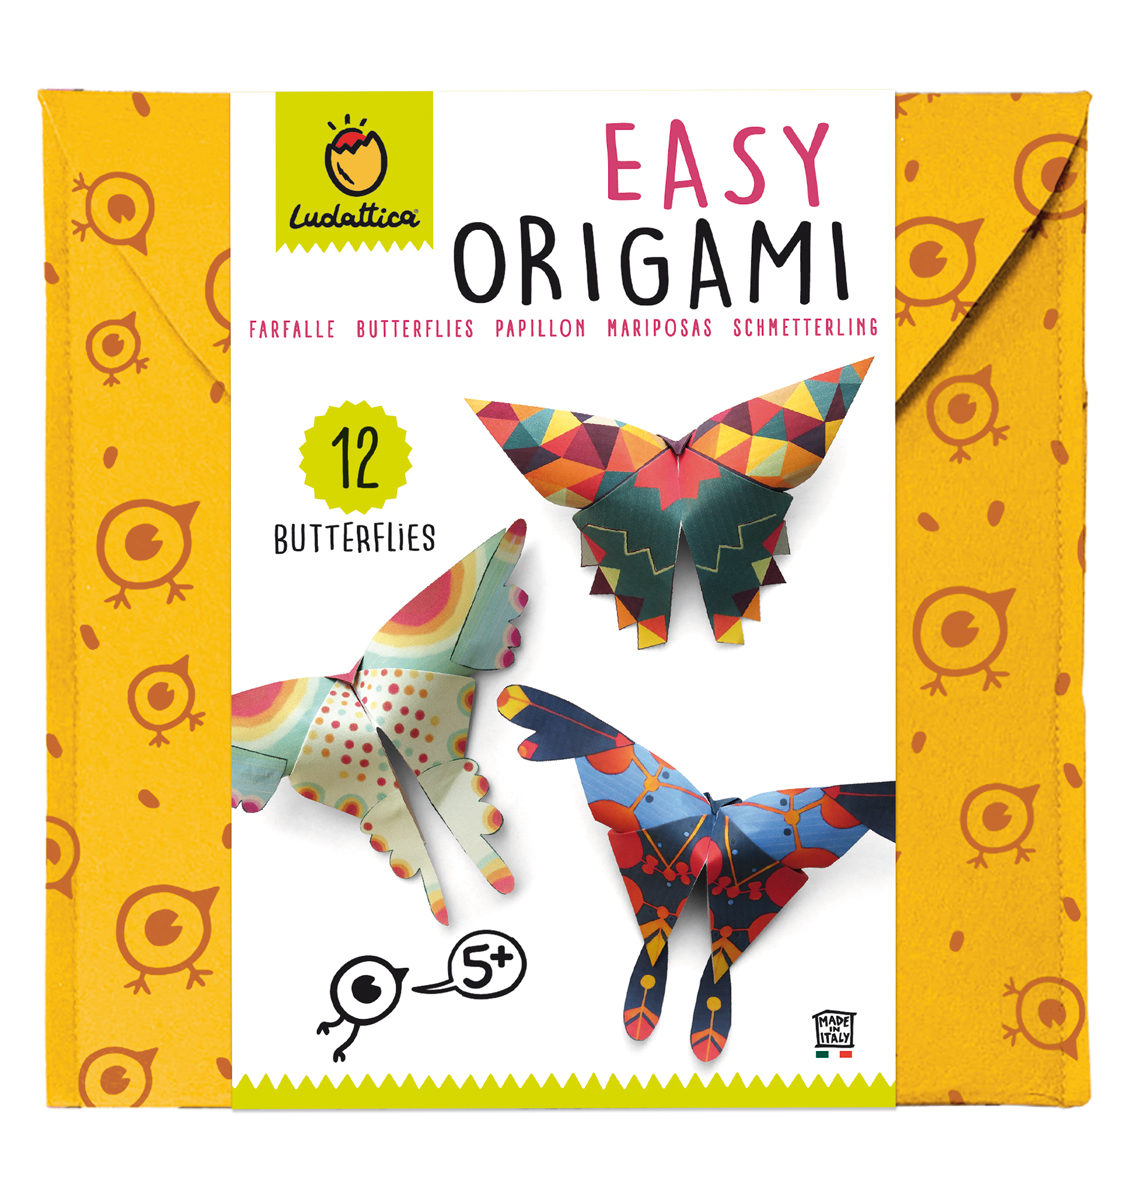 Easy Origami papillons St Barthelemy